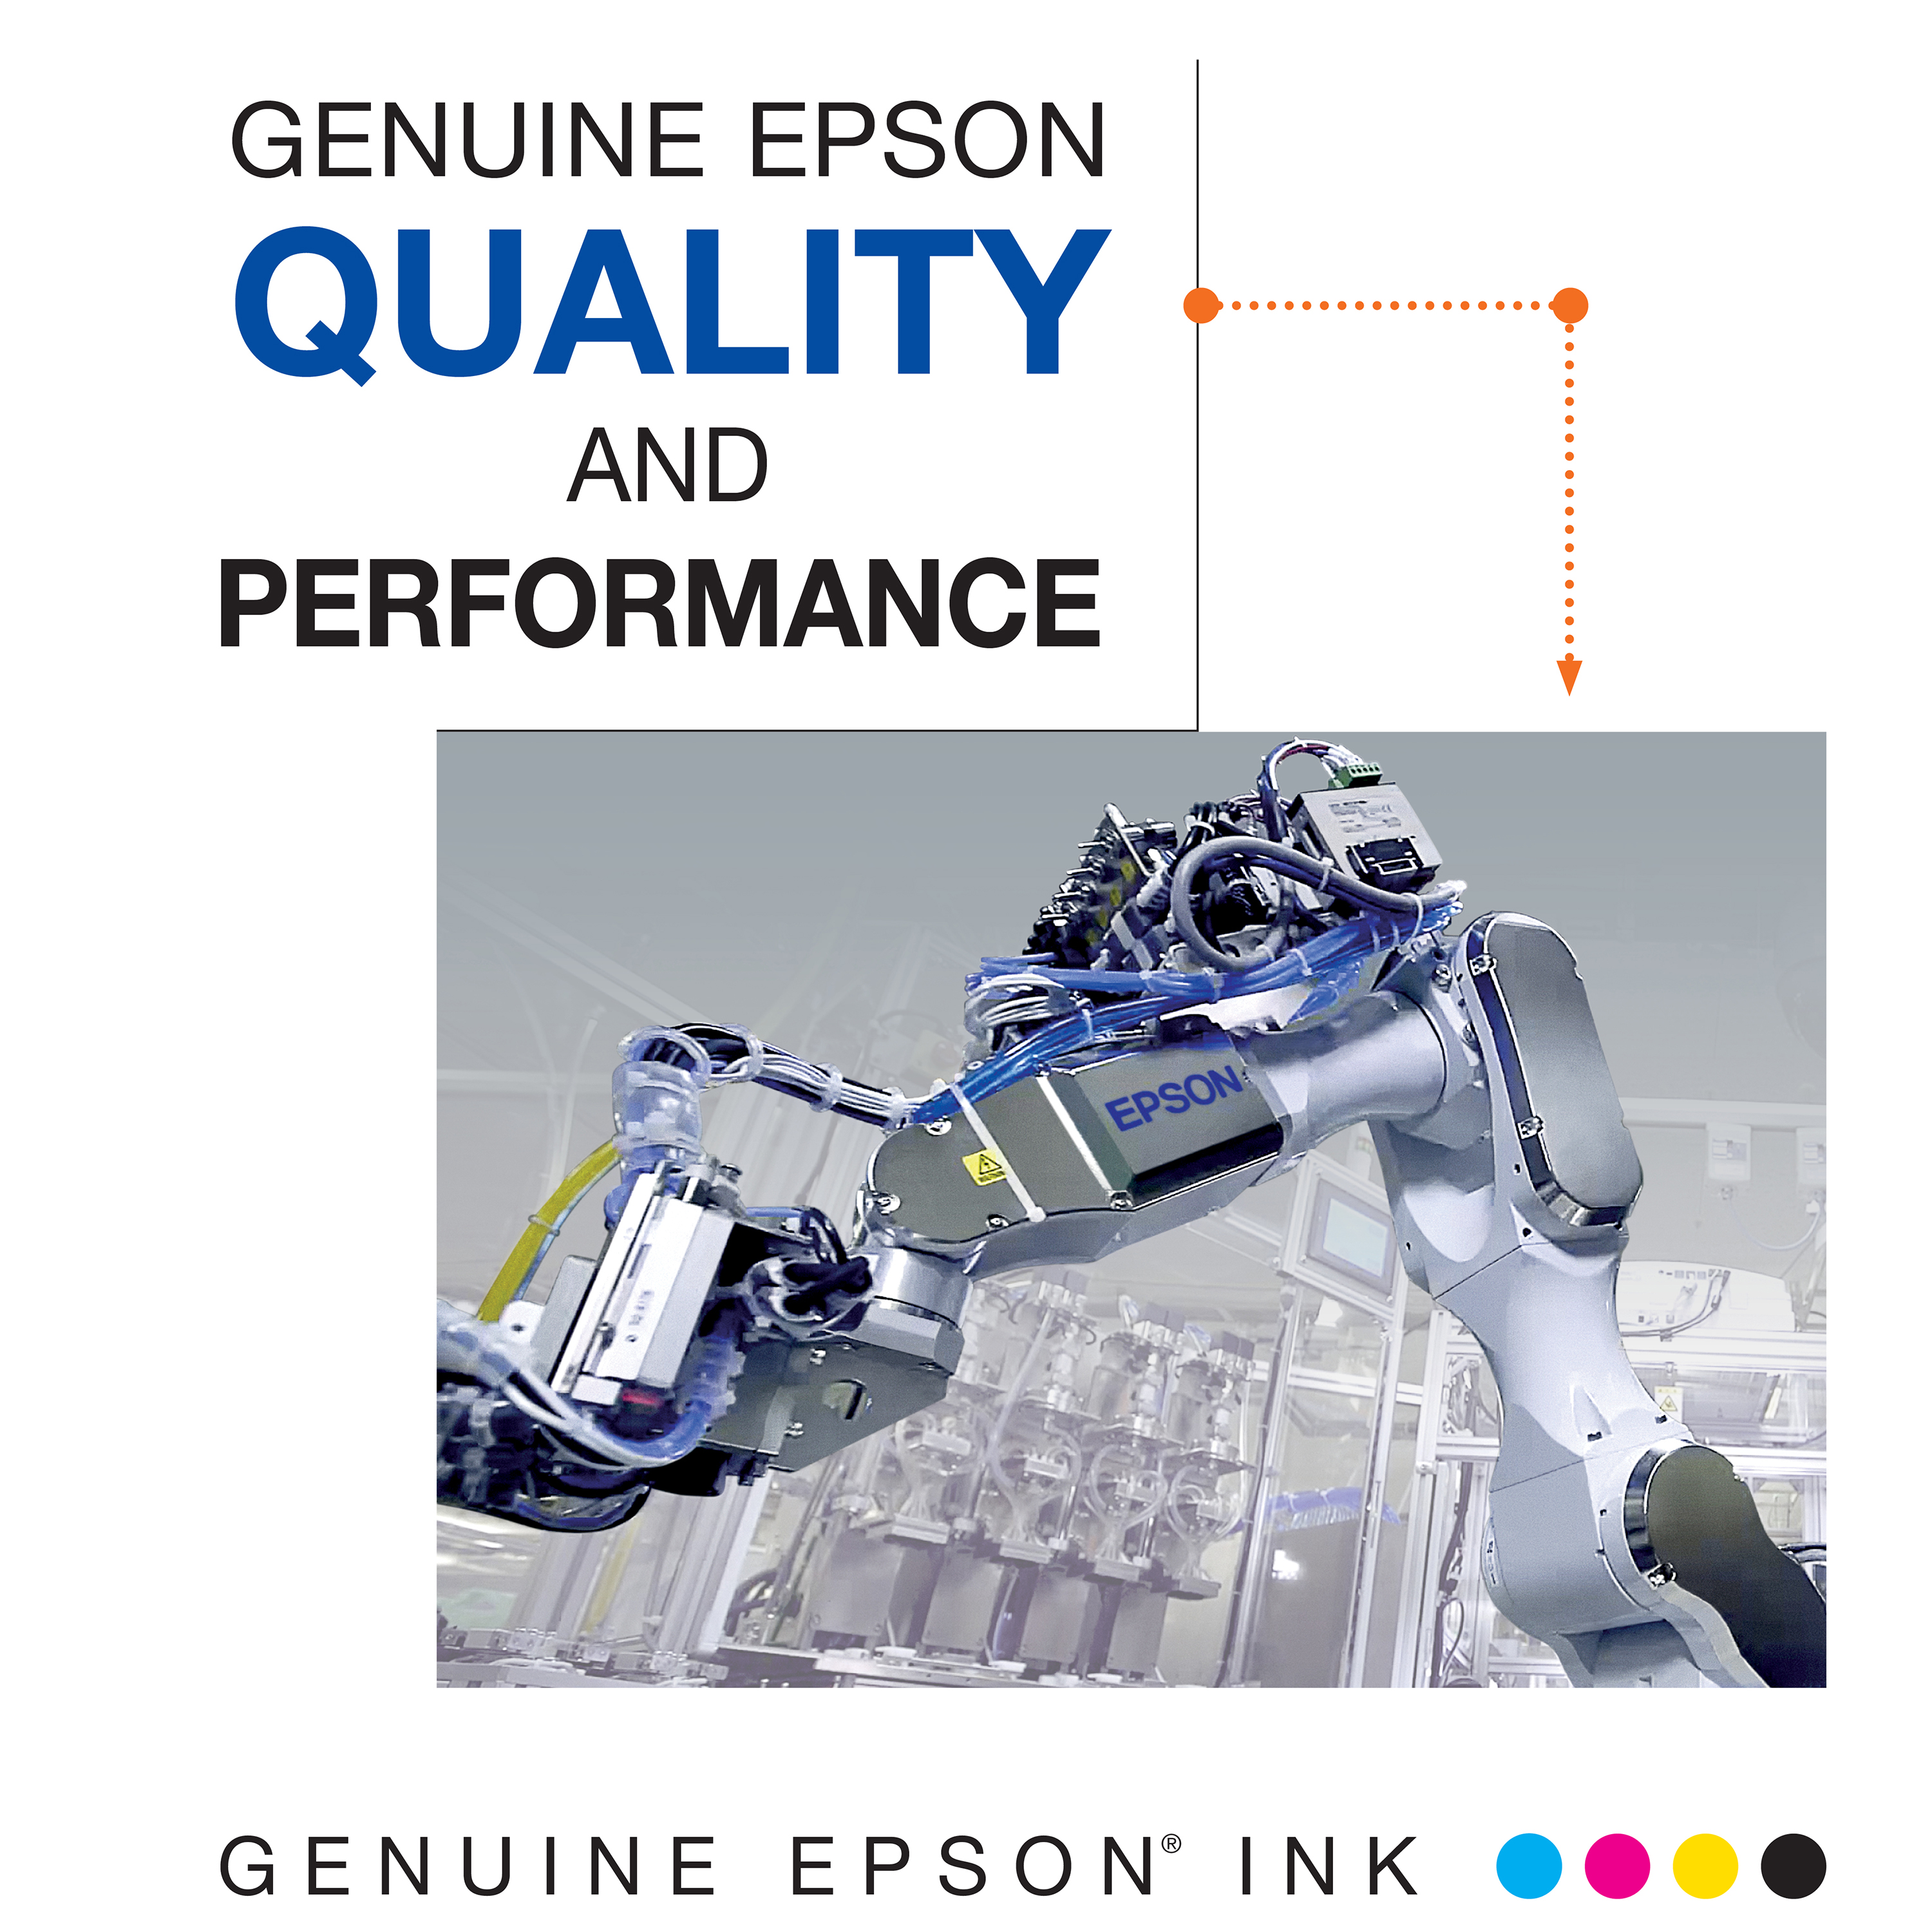 EPSON 288 DURABrite Ultra Ink High Capacity Black & Standard Color Cartridge Combo Pack (T288XL-BCS) Works with Expression XP-330, XP-430, XP-434, XP-340, XP-440, XP-446 - image 3 of 5